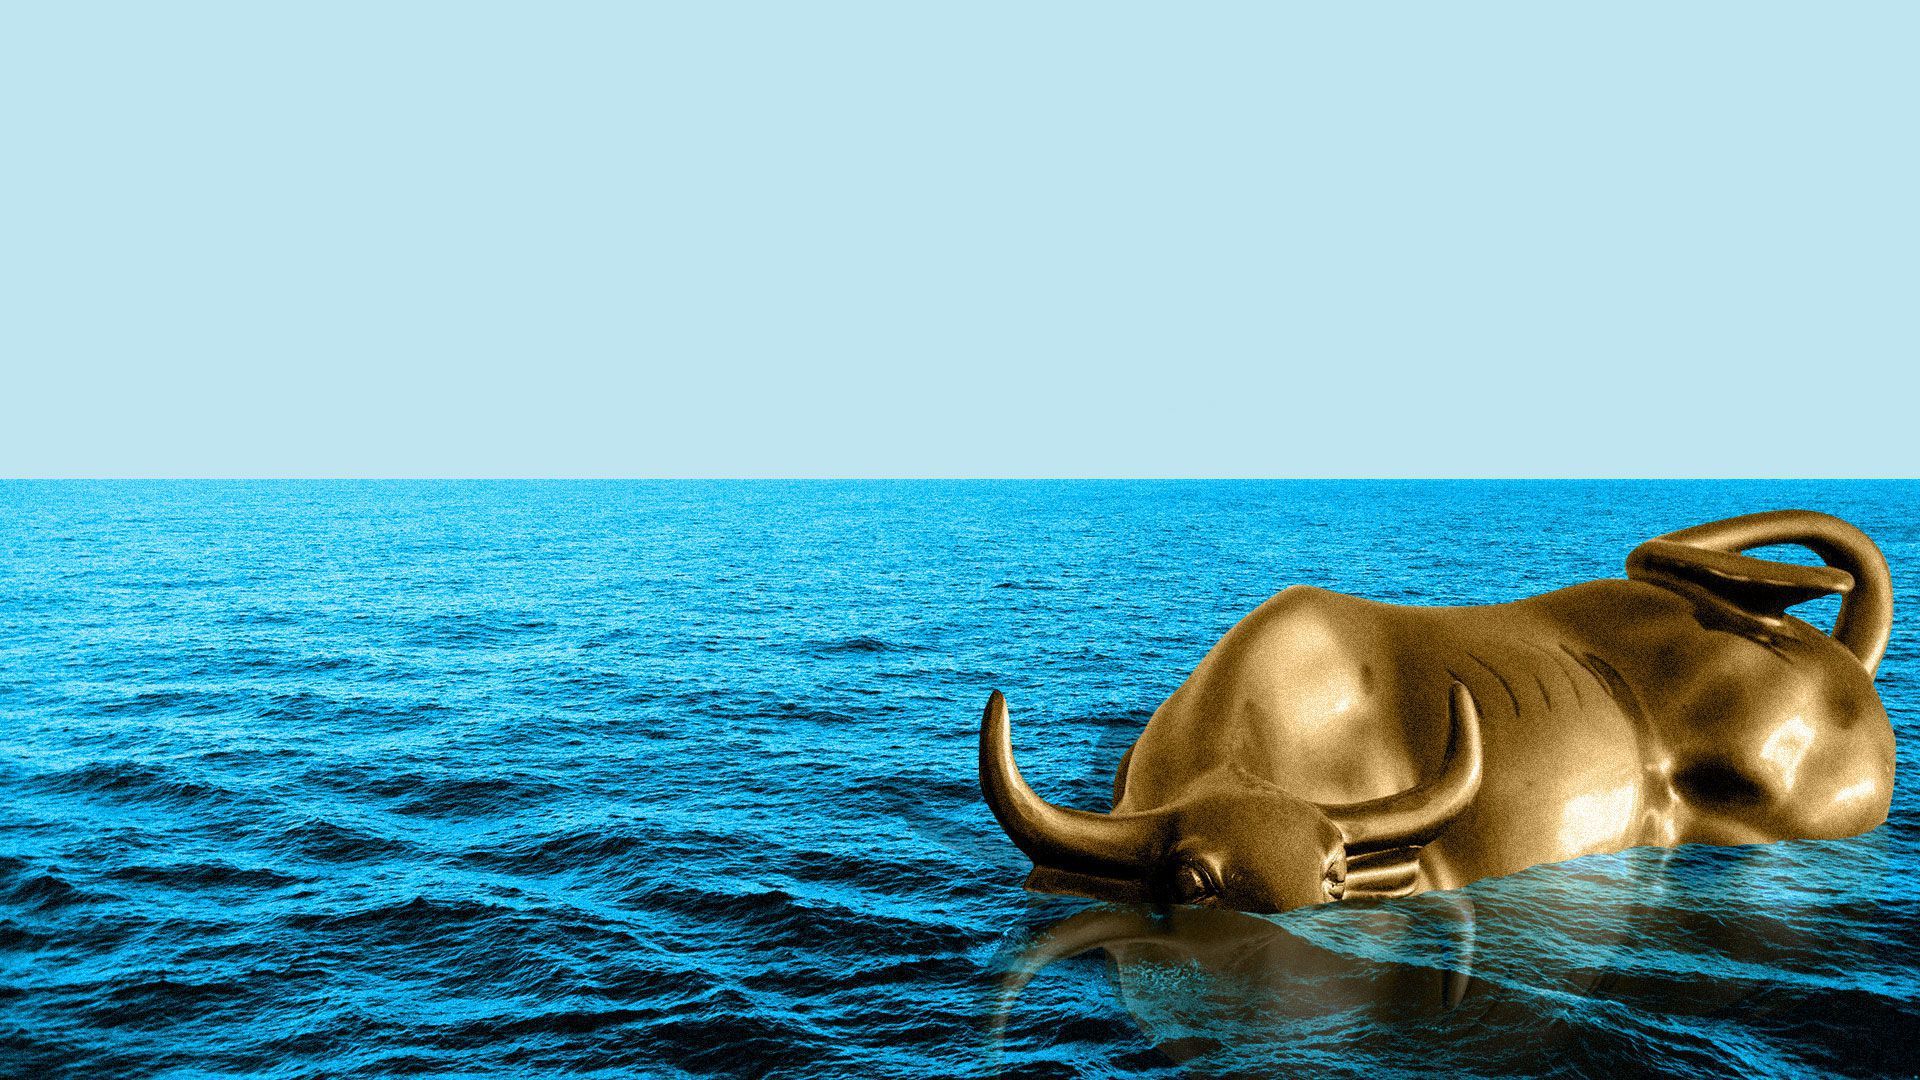 An illustration of a bull in water